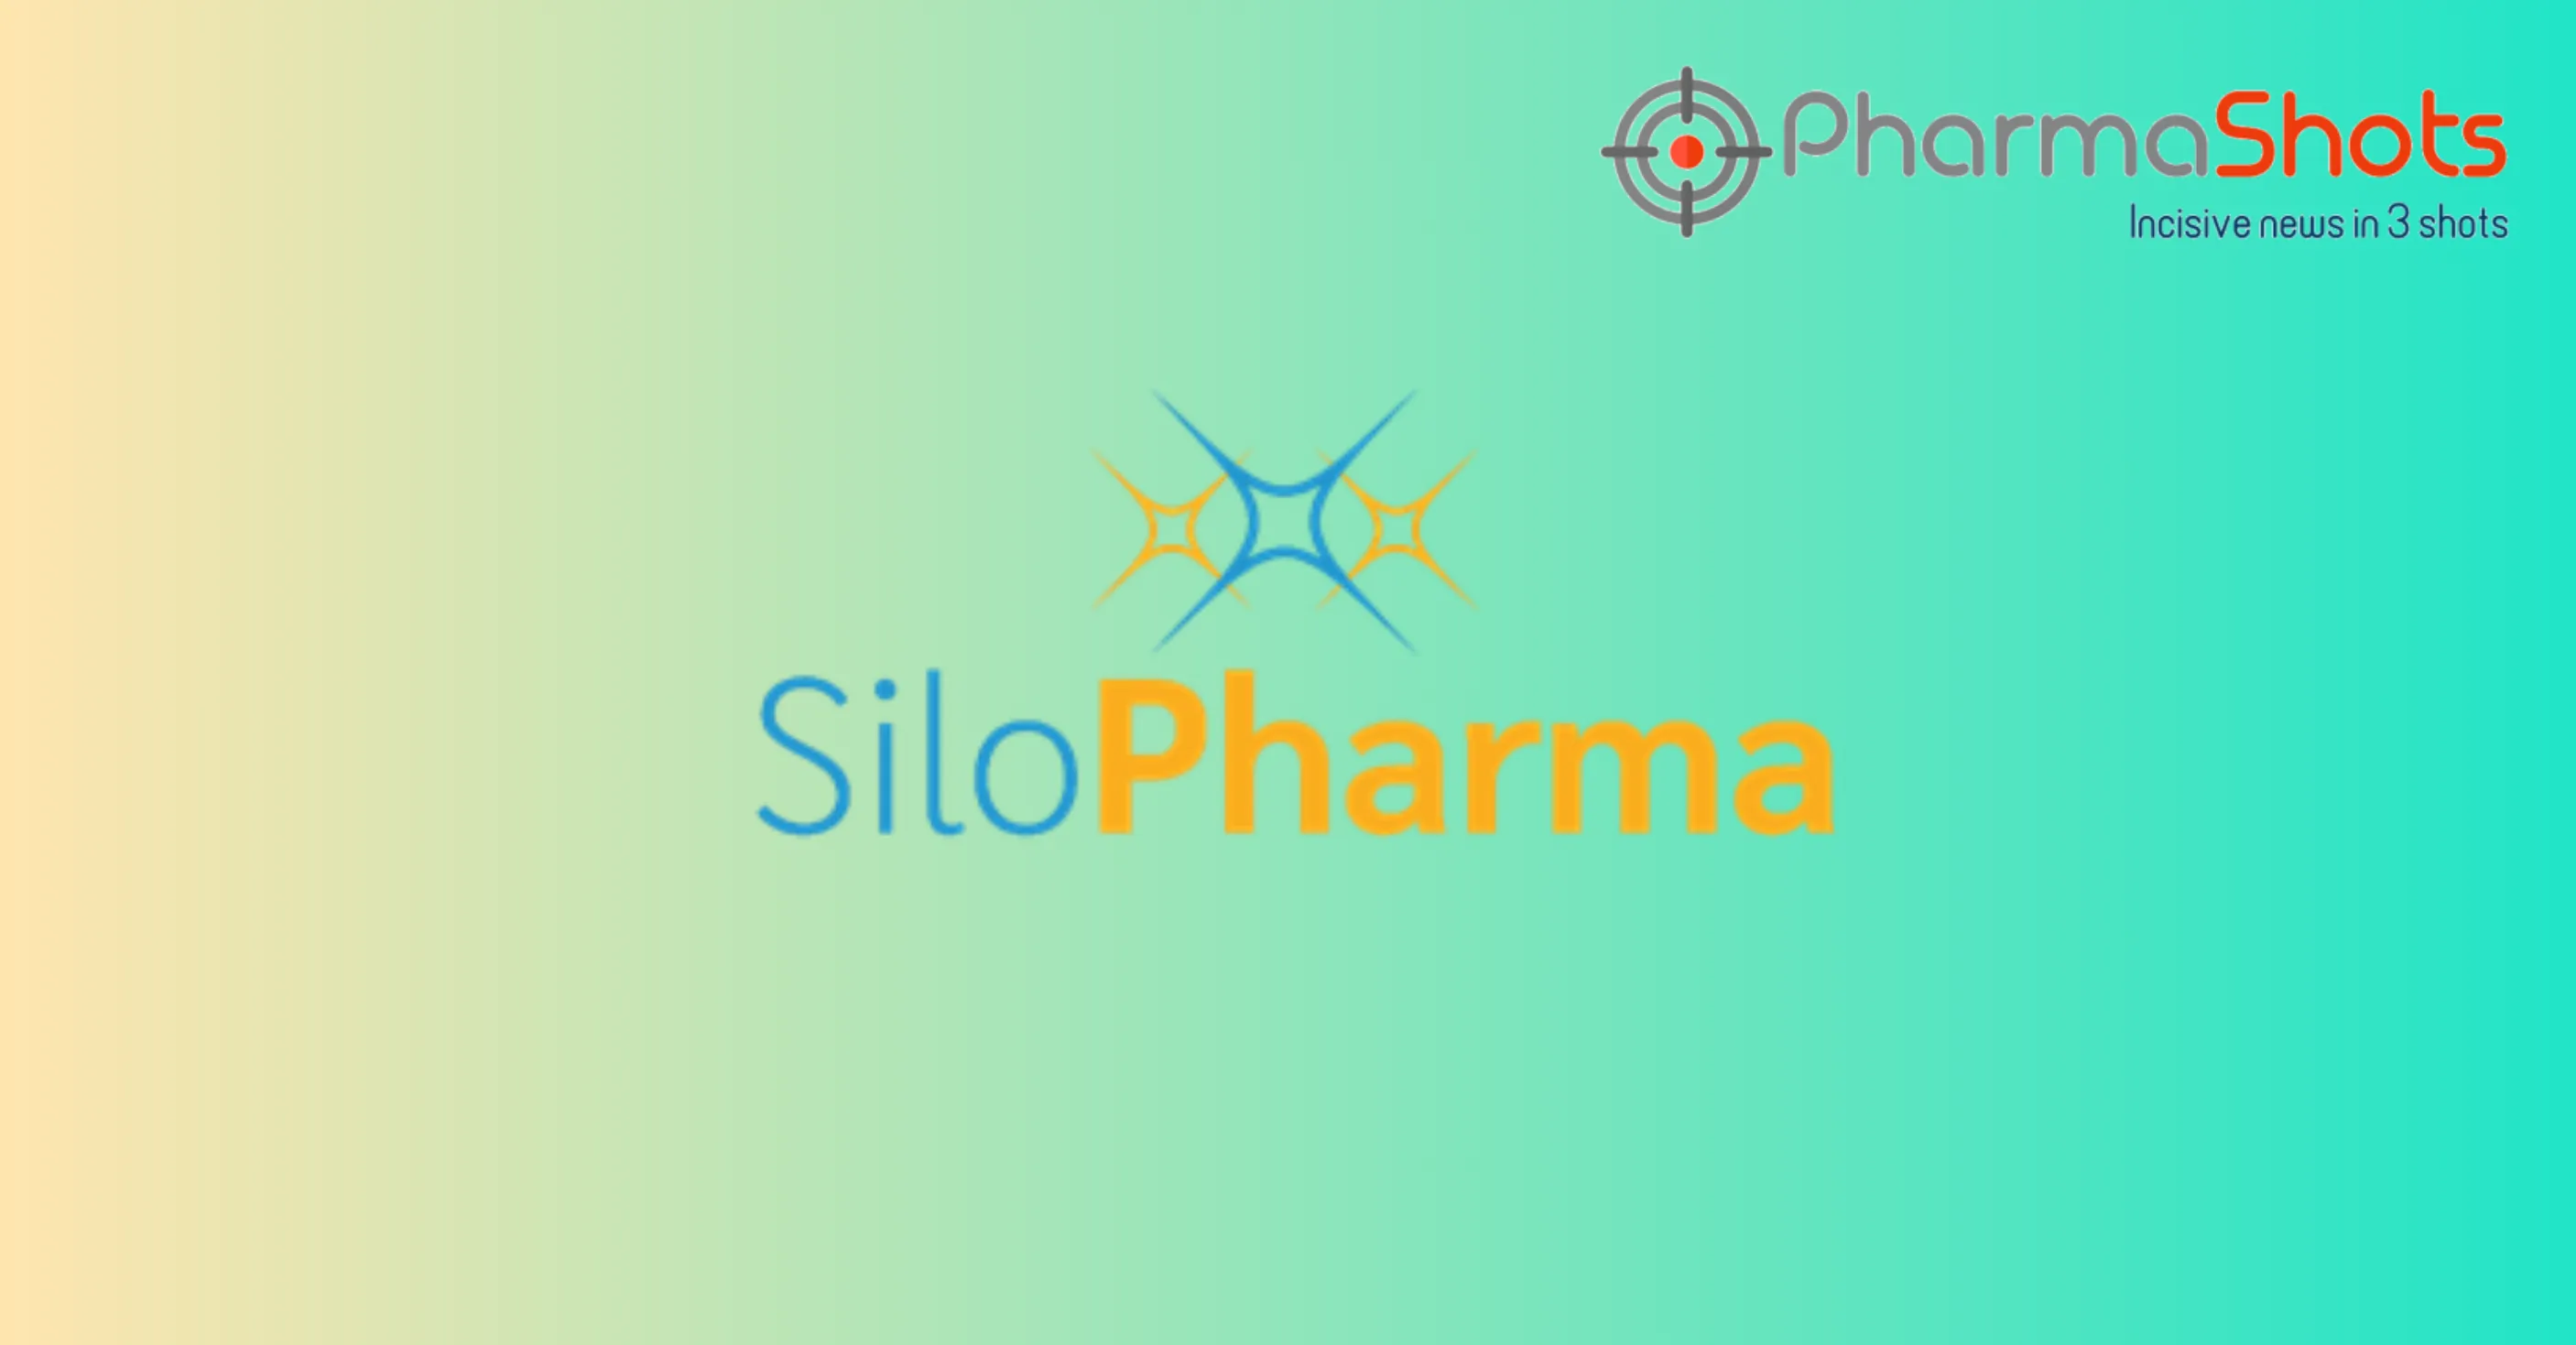 Silo Pharma with Sever Pharma Solutions Obtains Regulatory Approval to Conduct the Development of Ketamine Implant for Fibromyalgia